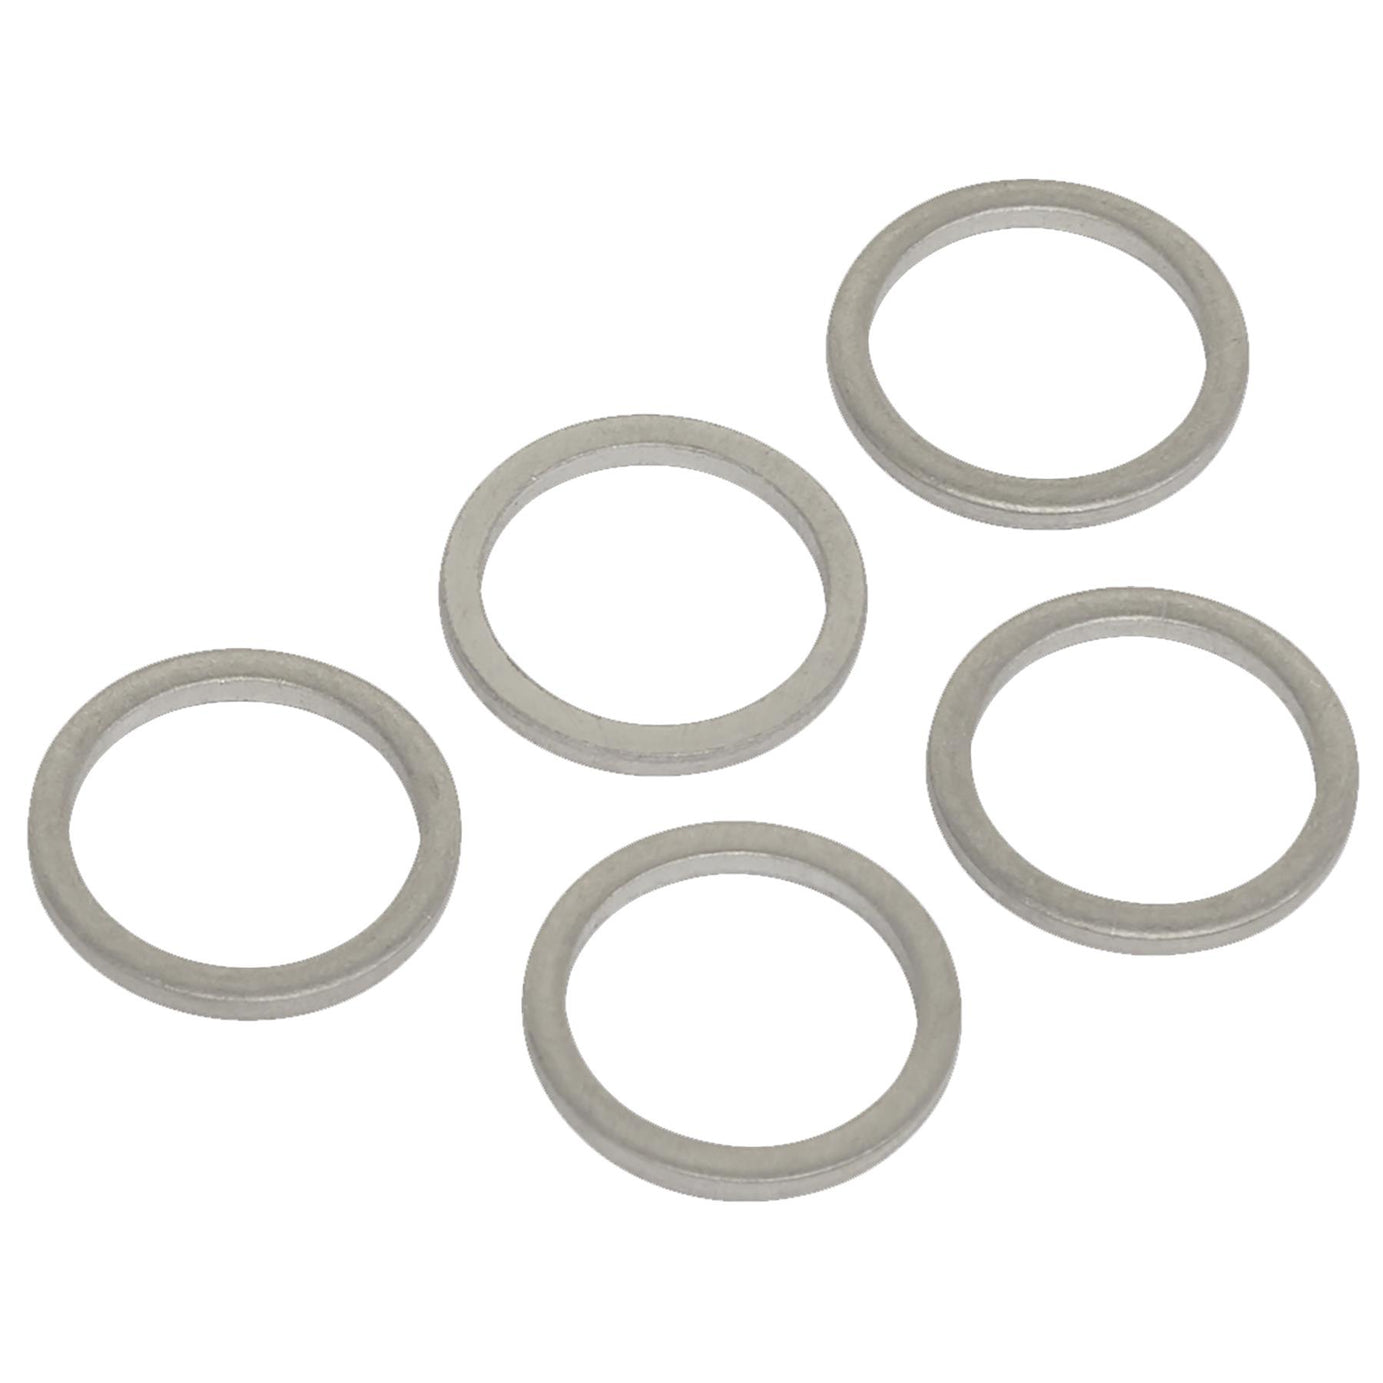 Sealey Sump Plug Washer M13 - Pack of 5 Engine